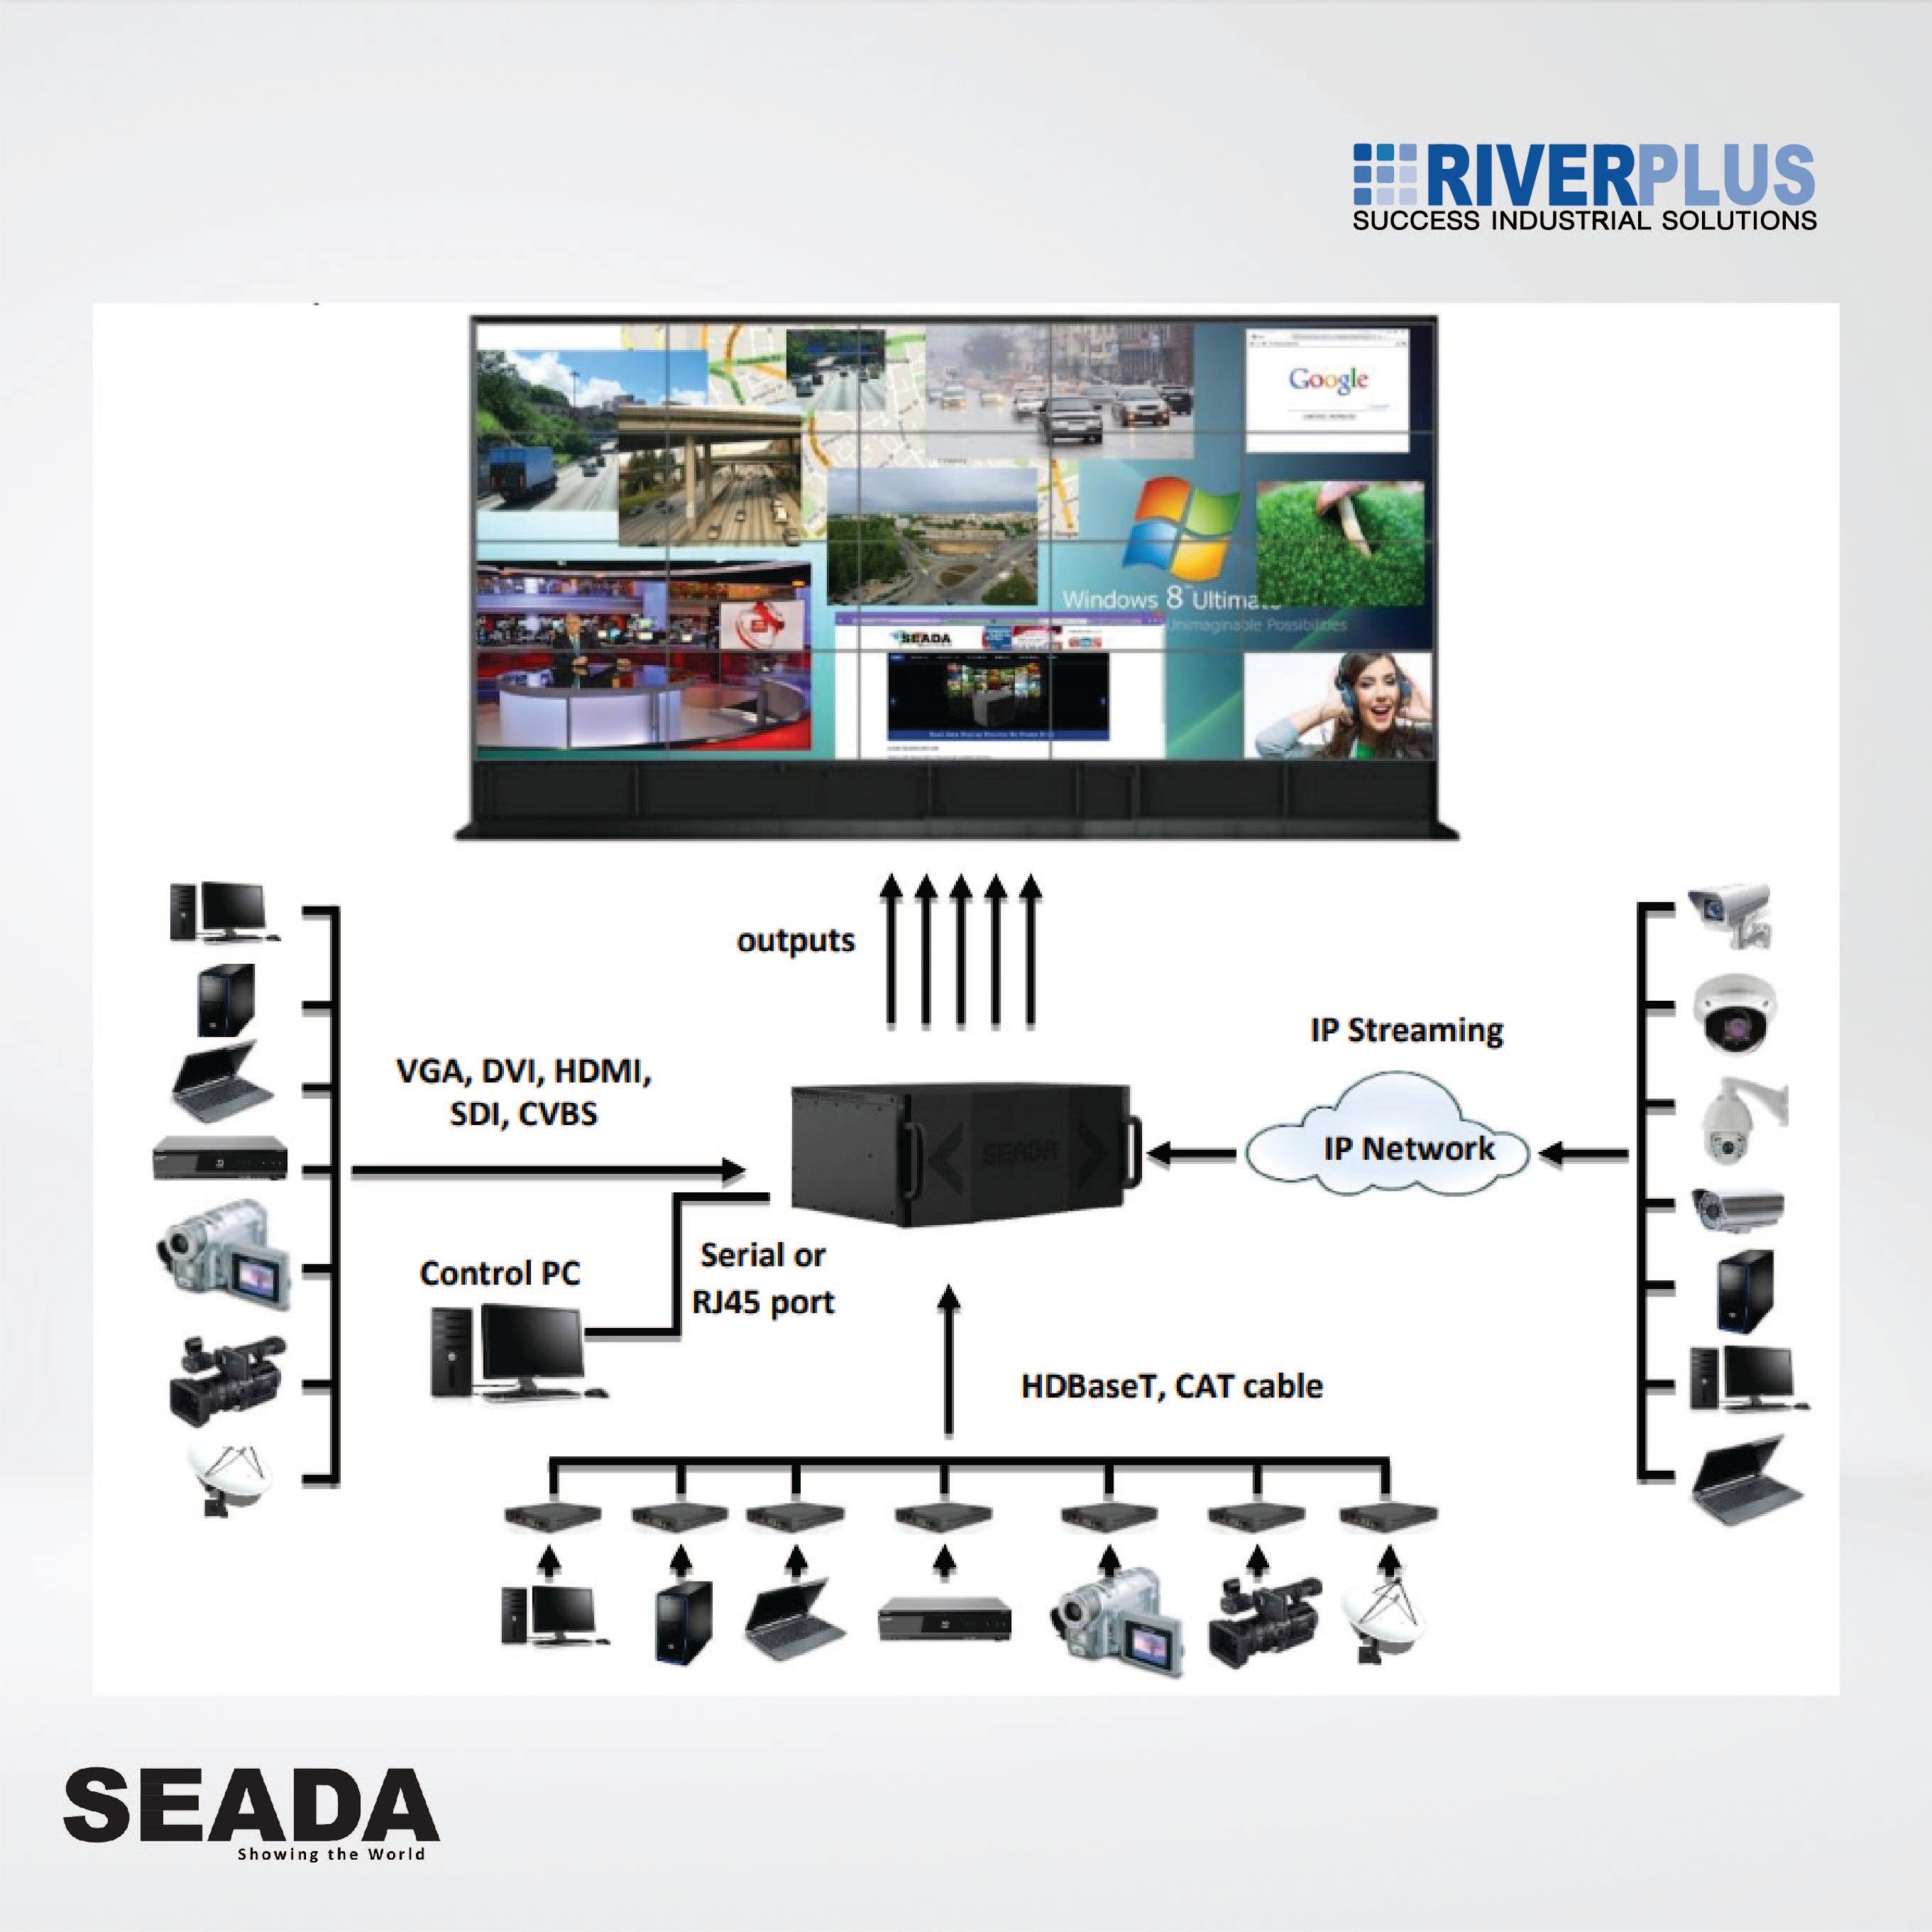 SWP16 CHASSIS 16U, 156 INPUT/40 OUTPUT ,Video wall controllers are the most Advanced solution - Riverplus